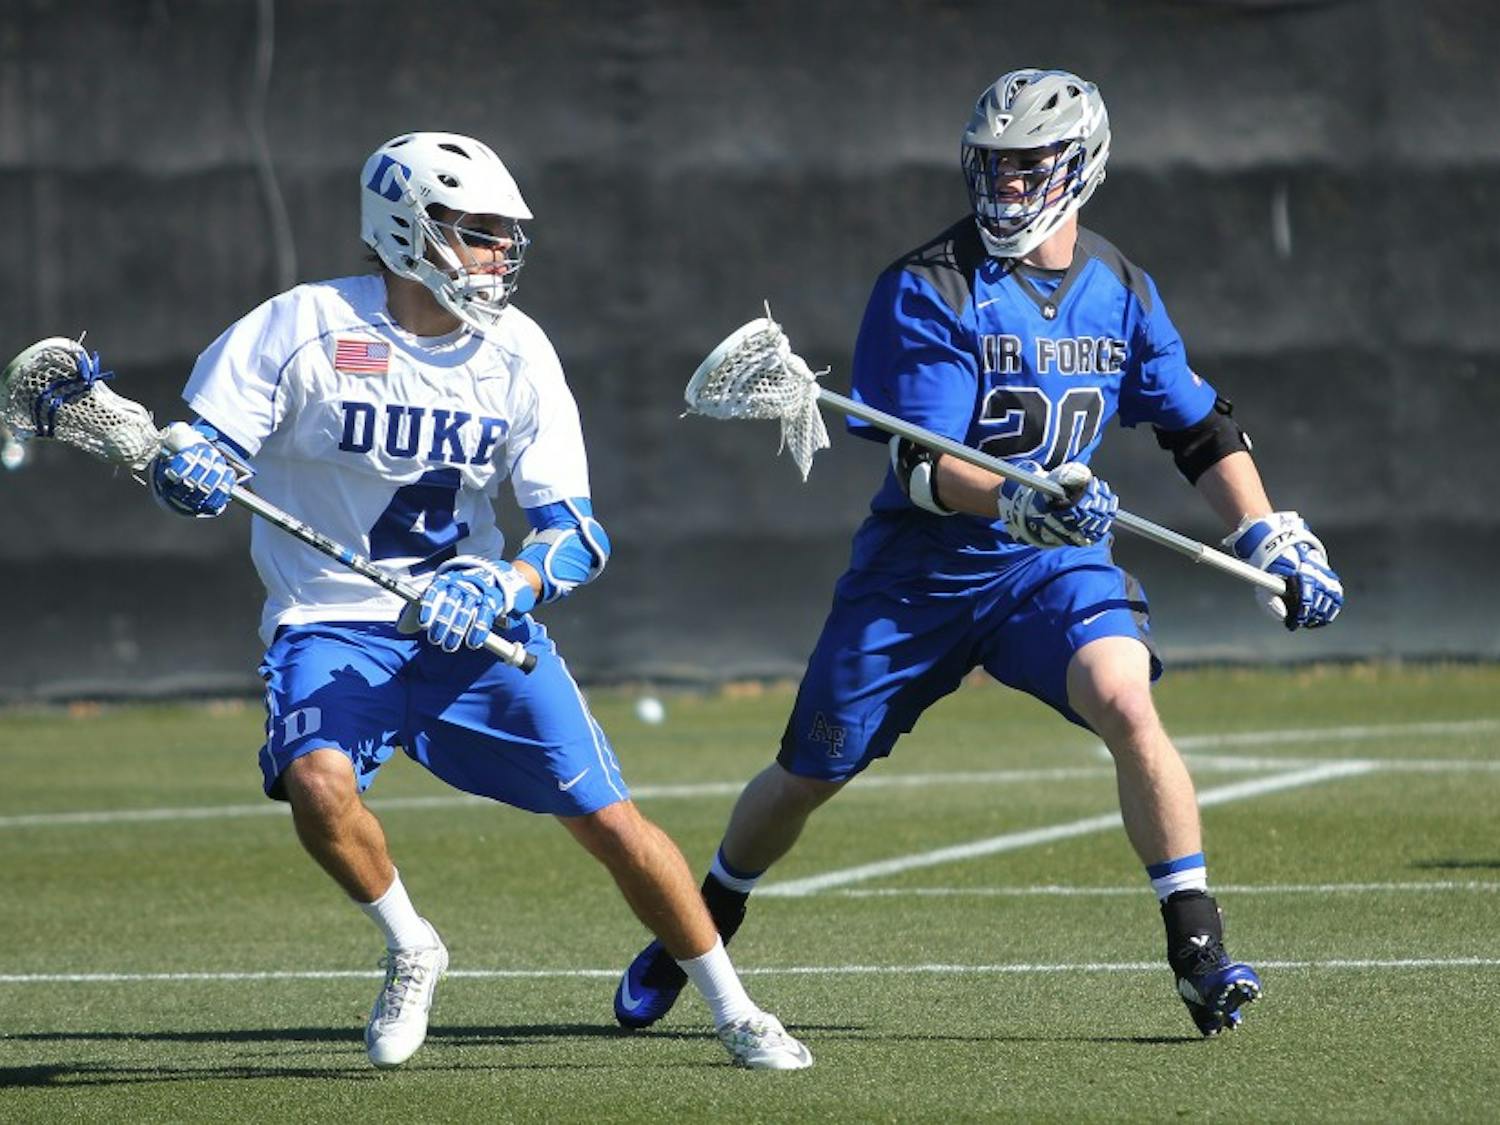 Chad Cohan had his first career hat trick in Duke's 17-13 loss to No. 1 Denver.